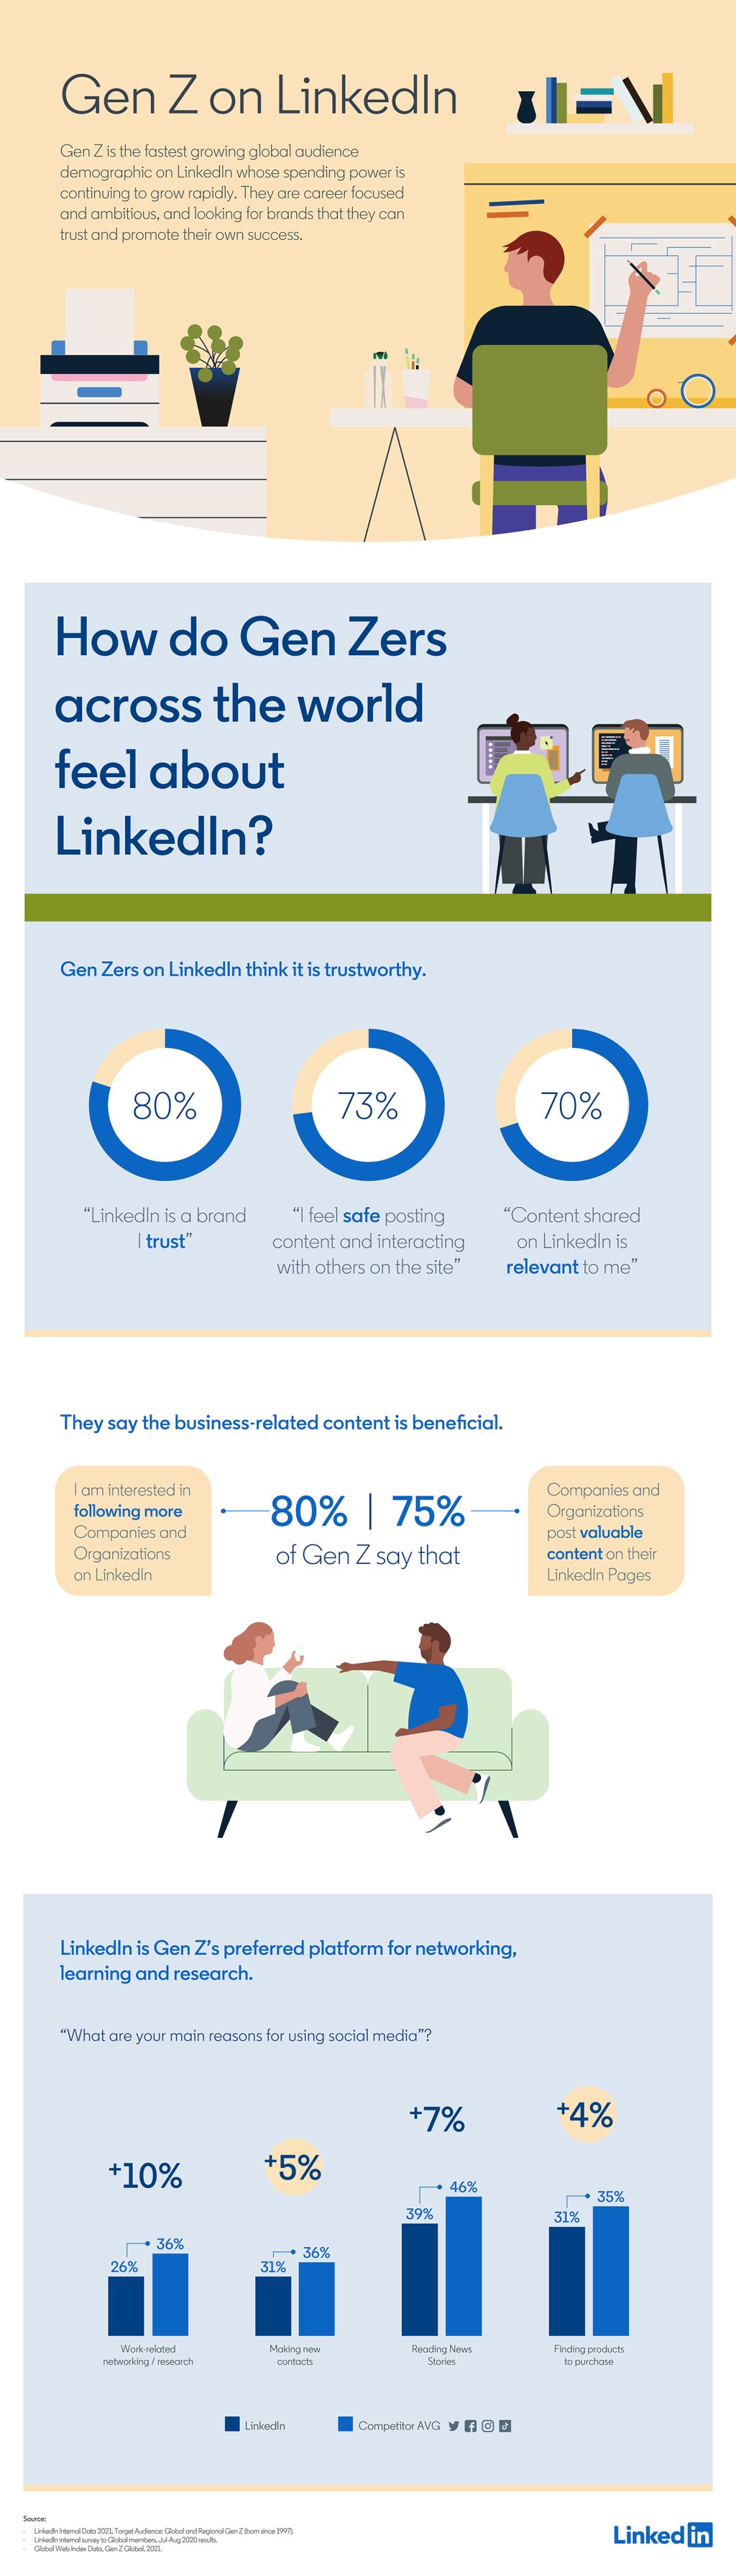 Infographic: How do GenZers across the world feel about LinkedIn?